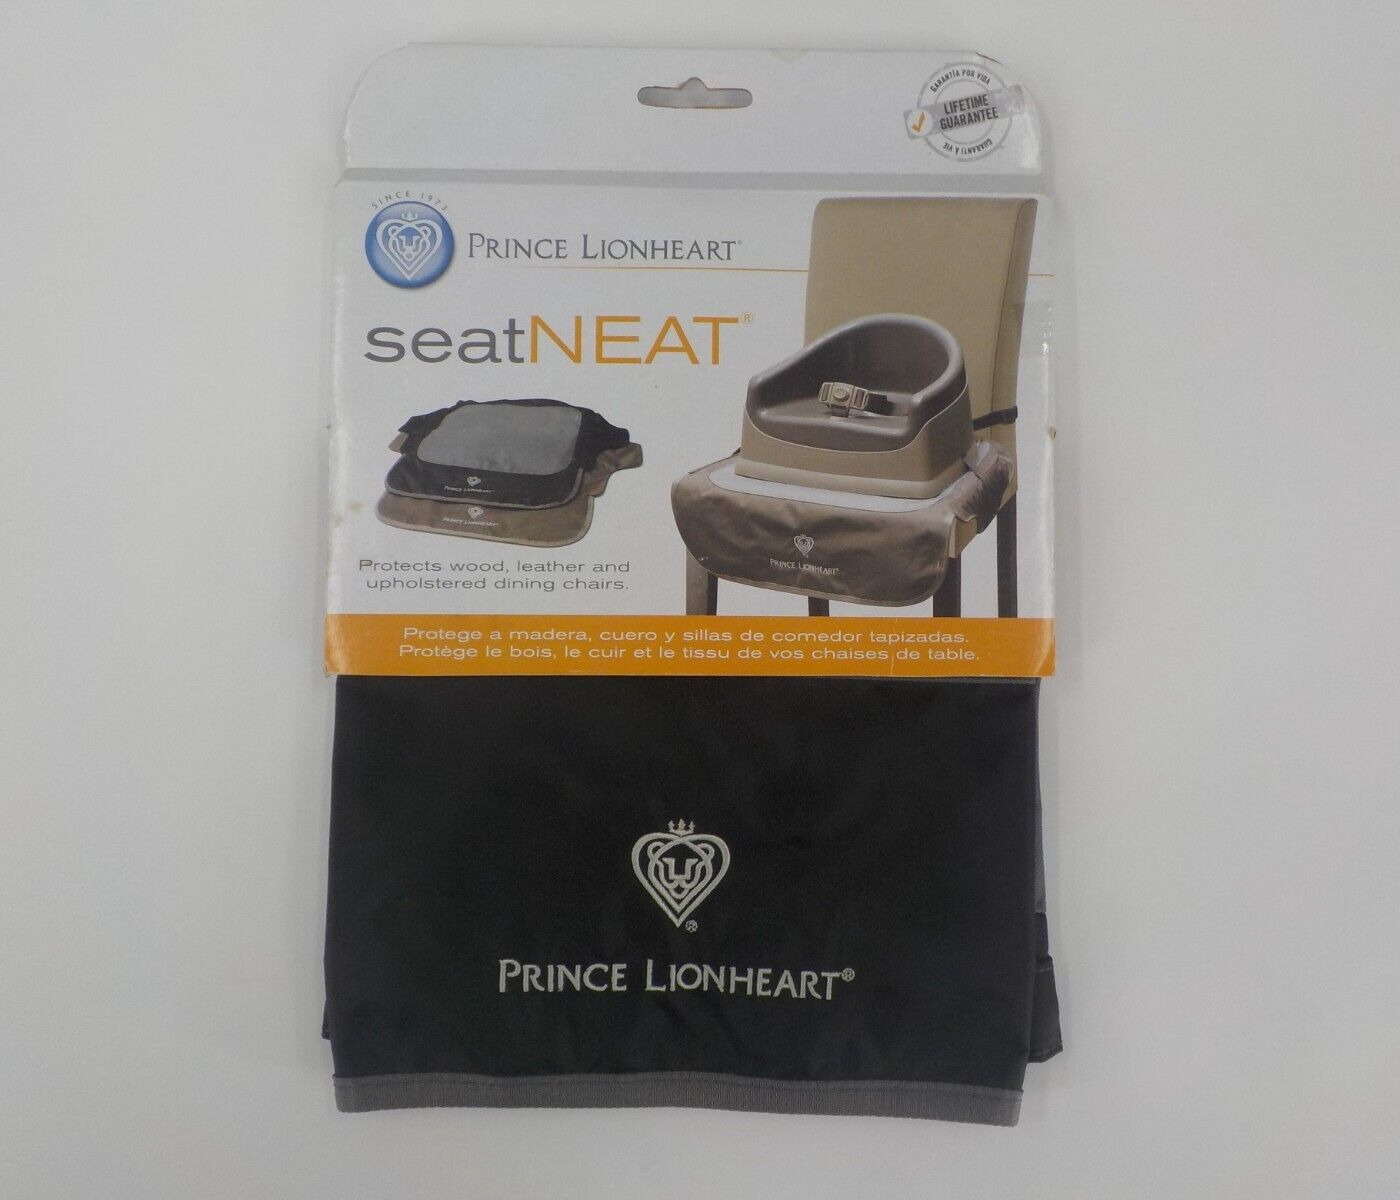 PRINCE LIONHEART SEATNEAT PROTECTS FURNITURE BABY TODDLER SEAT PROTECTOR - $12.99